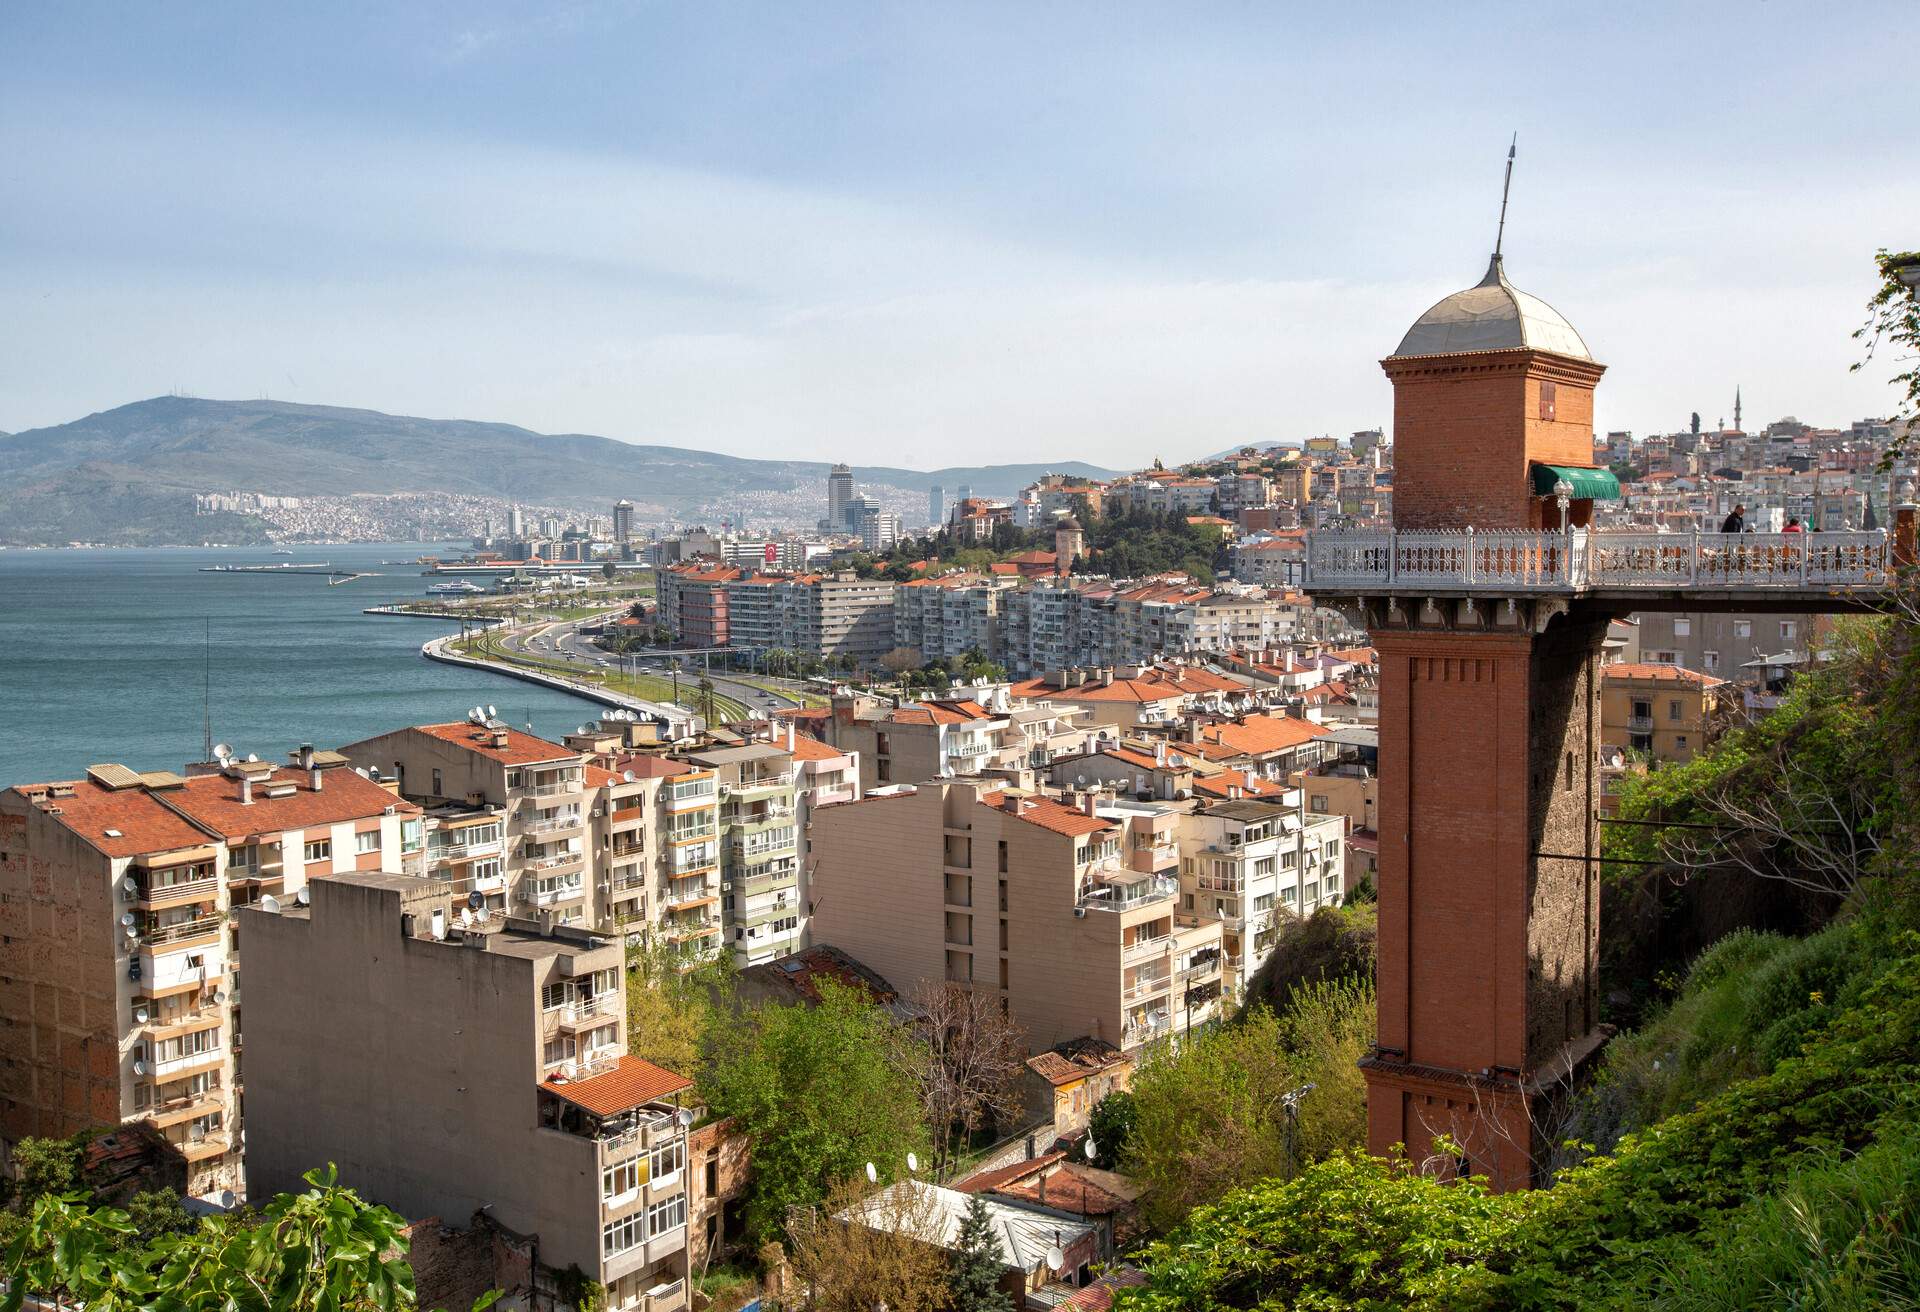 Lift the general appearance and history of Izmir. Turkey; Shutterstock ID 1116876275